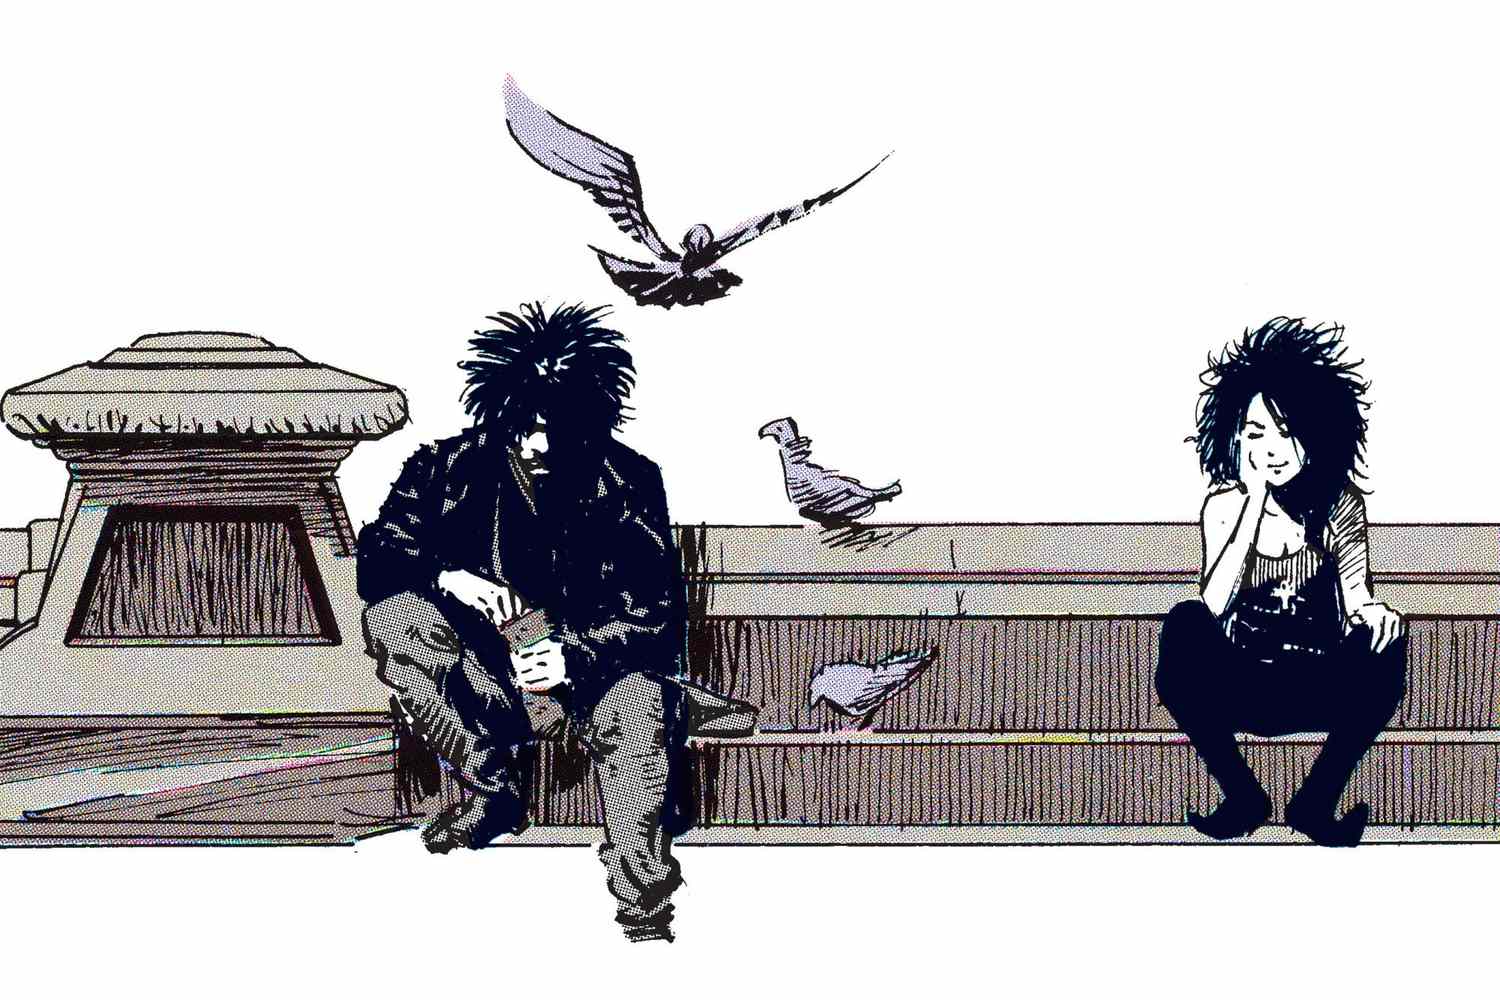 Exploring the Enchanting World of "The Sandman": A 10 volume Masterpiece of Graphic Literature